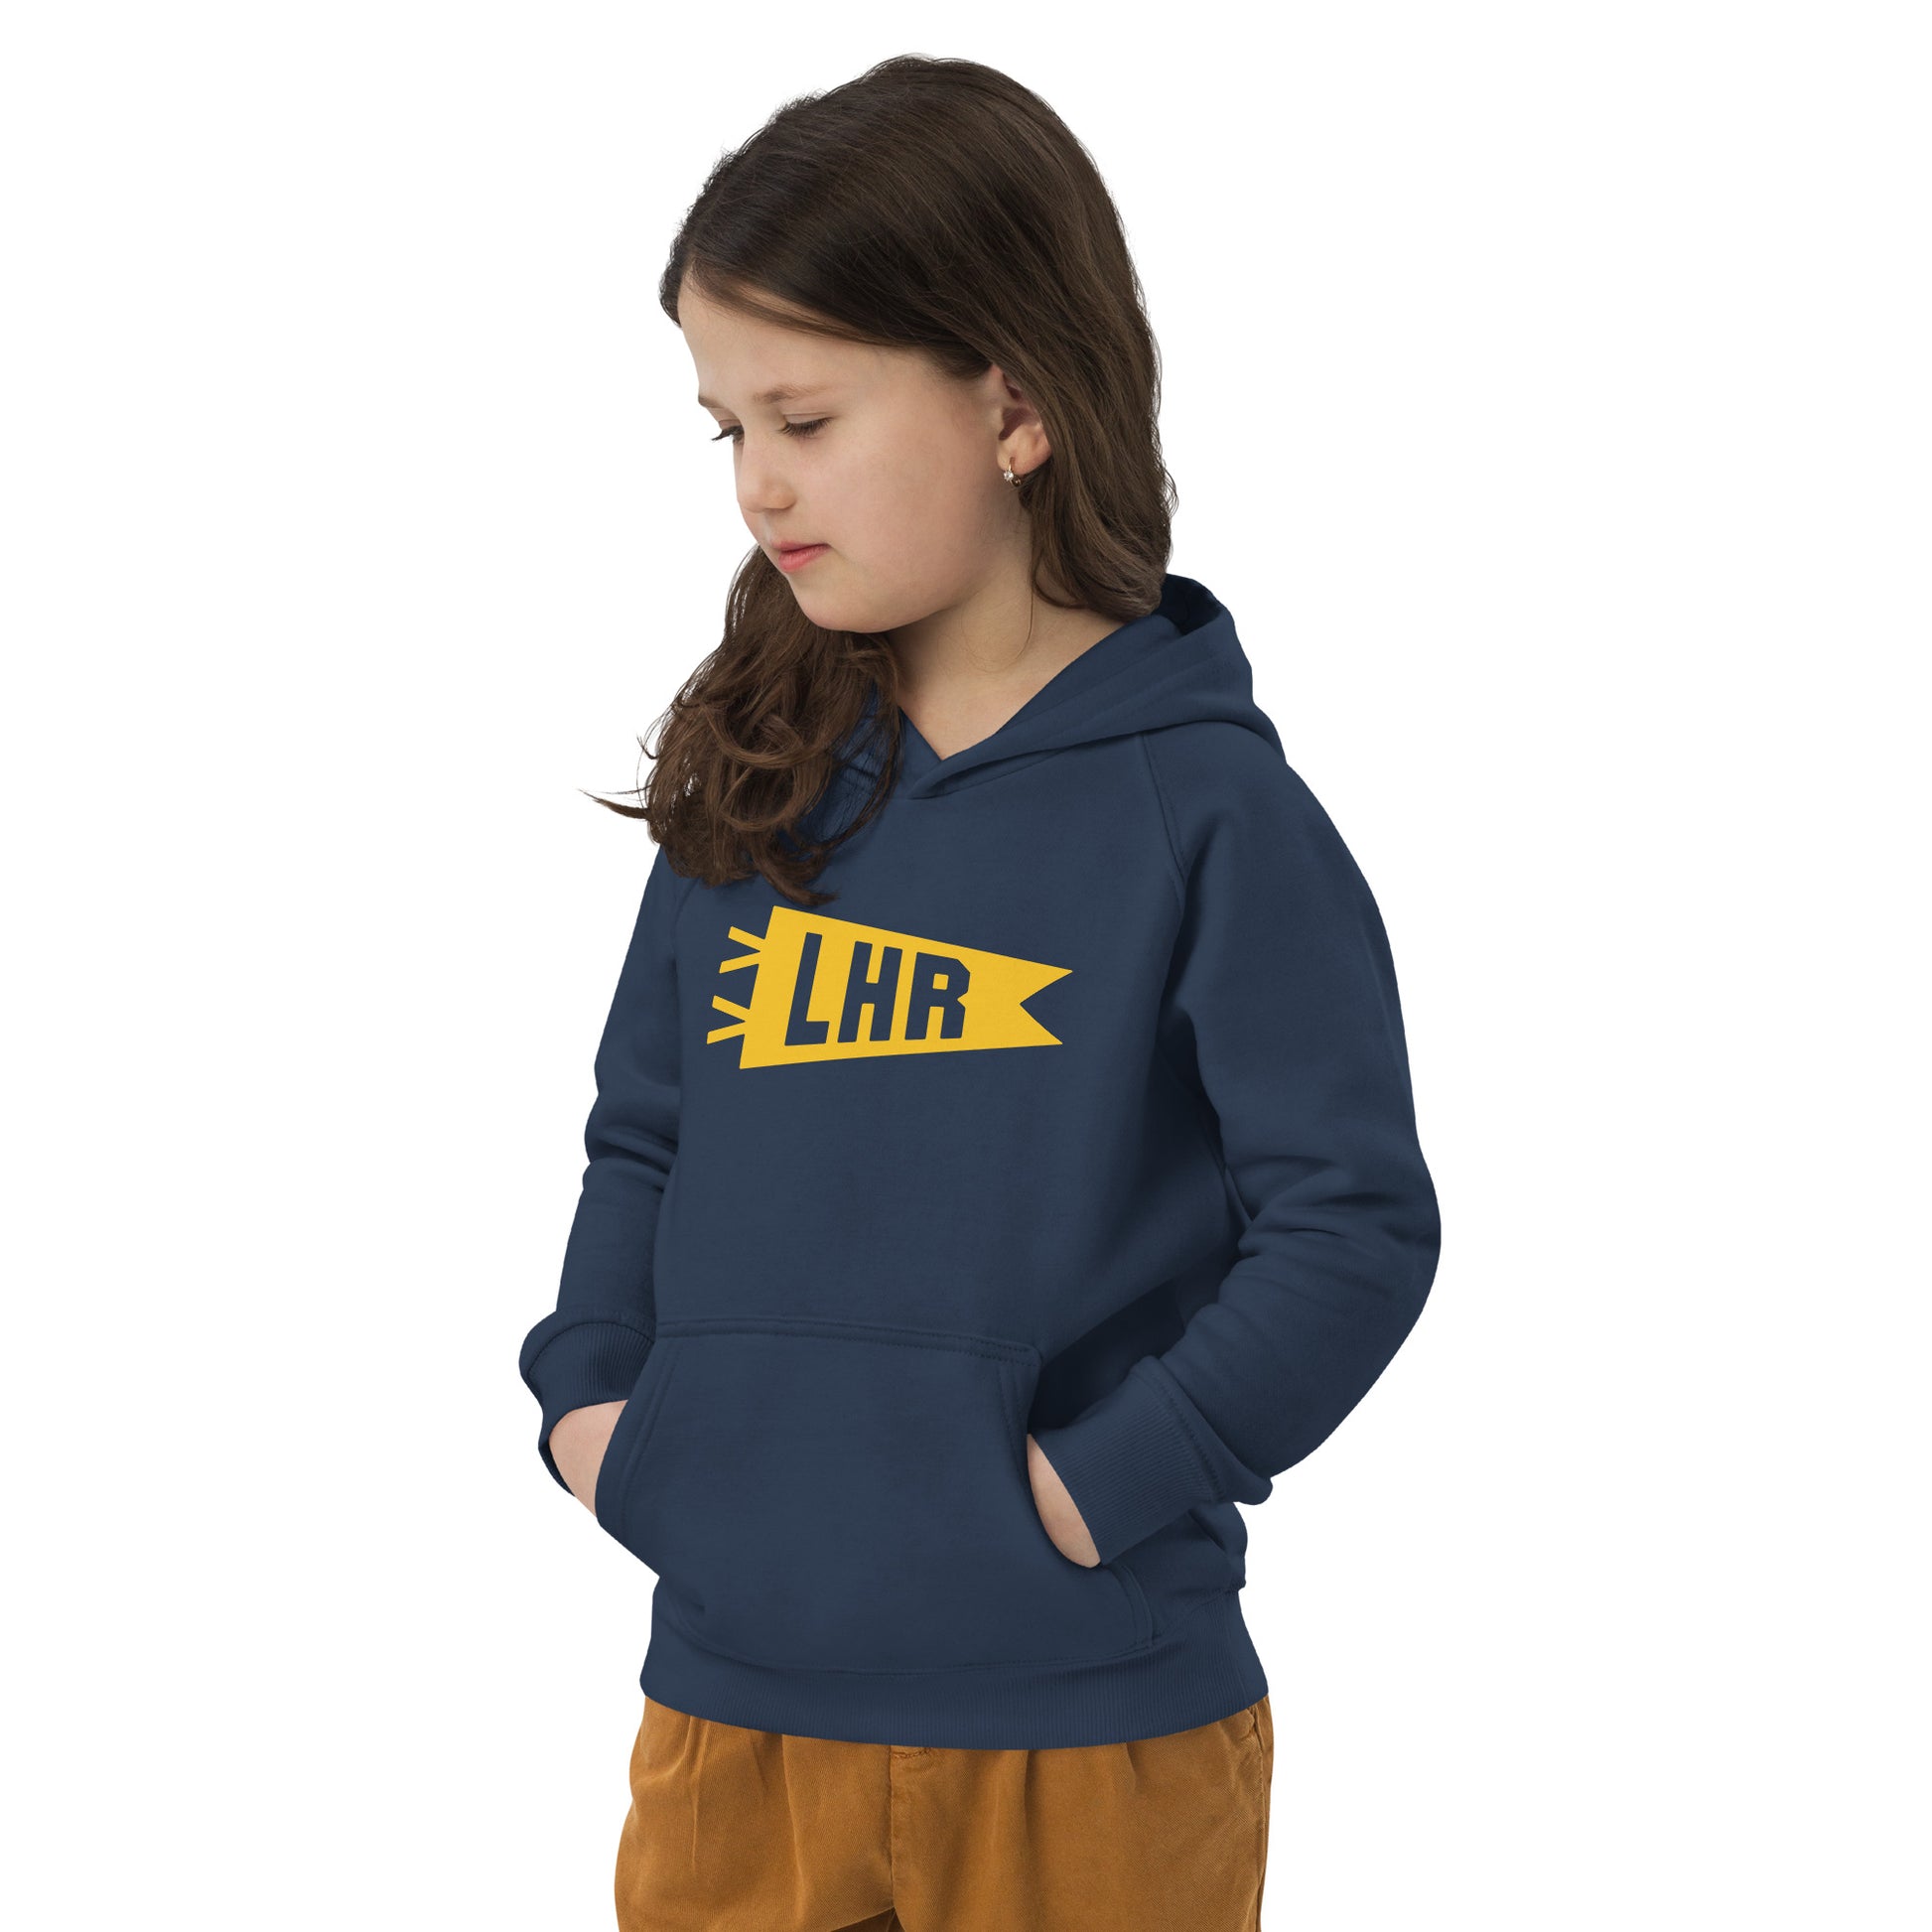 Kid's Sustainable Hoodie - Yellow Graphic • LHR London • YHM Designs - Image 05